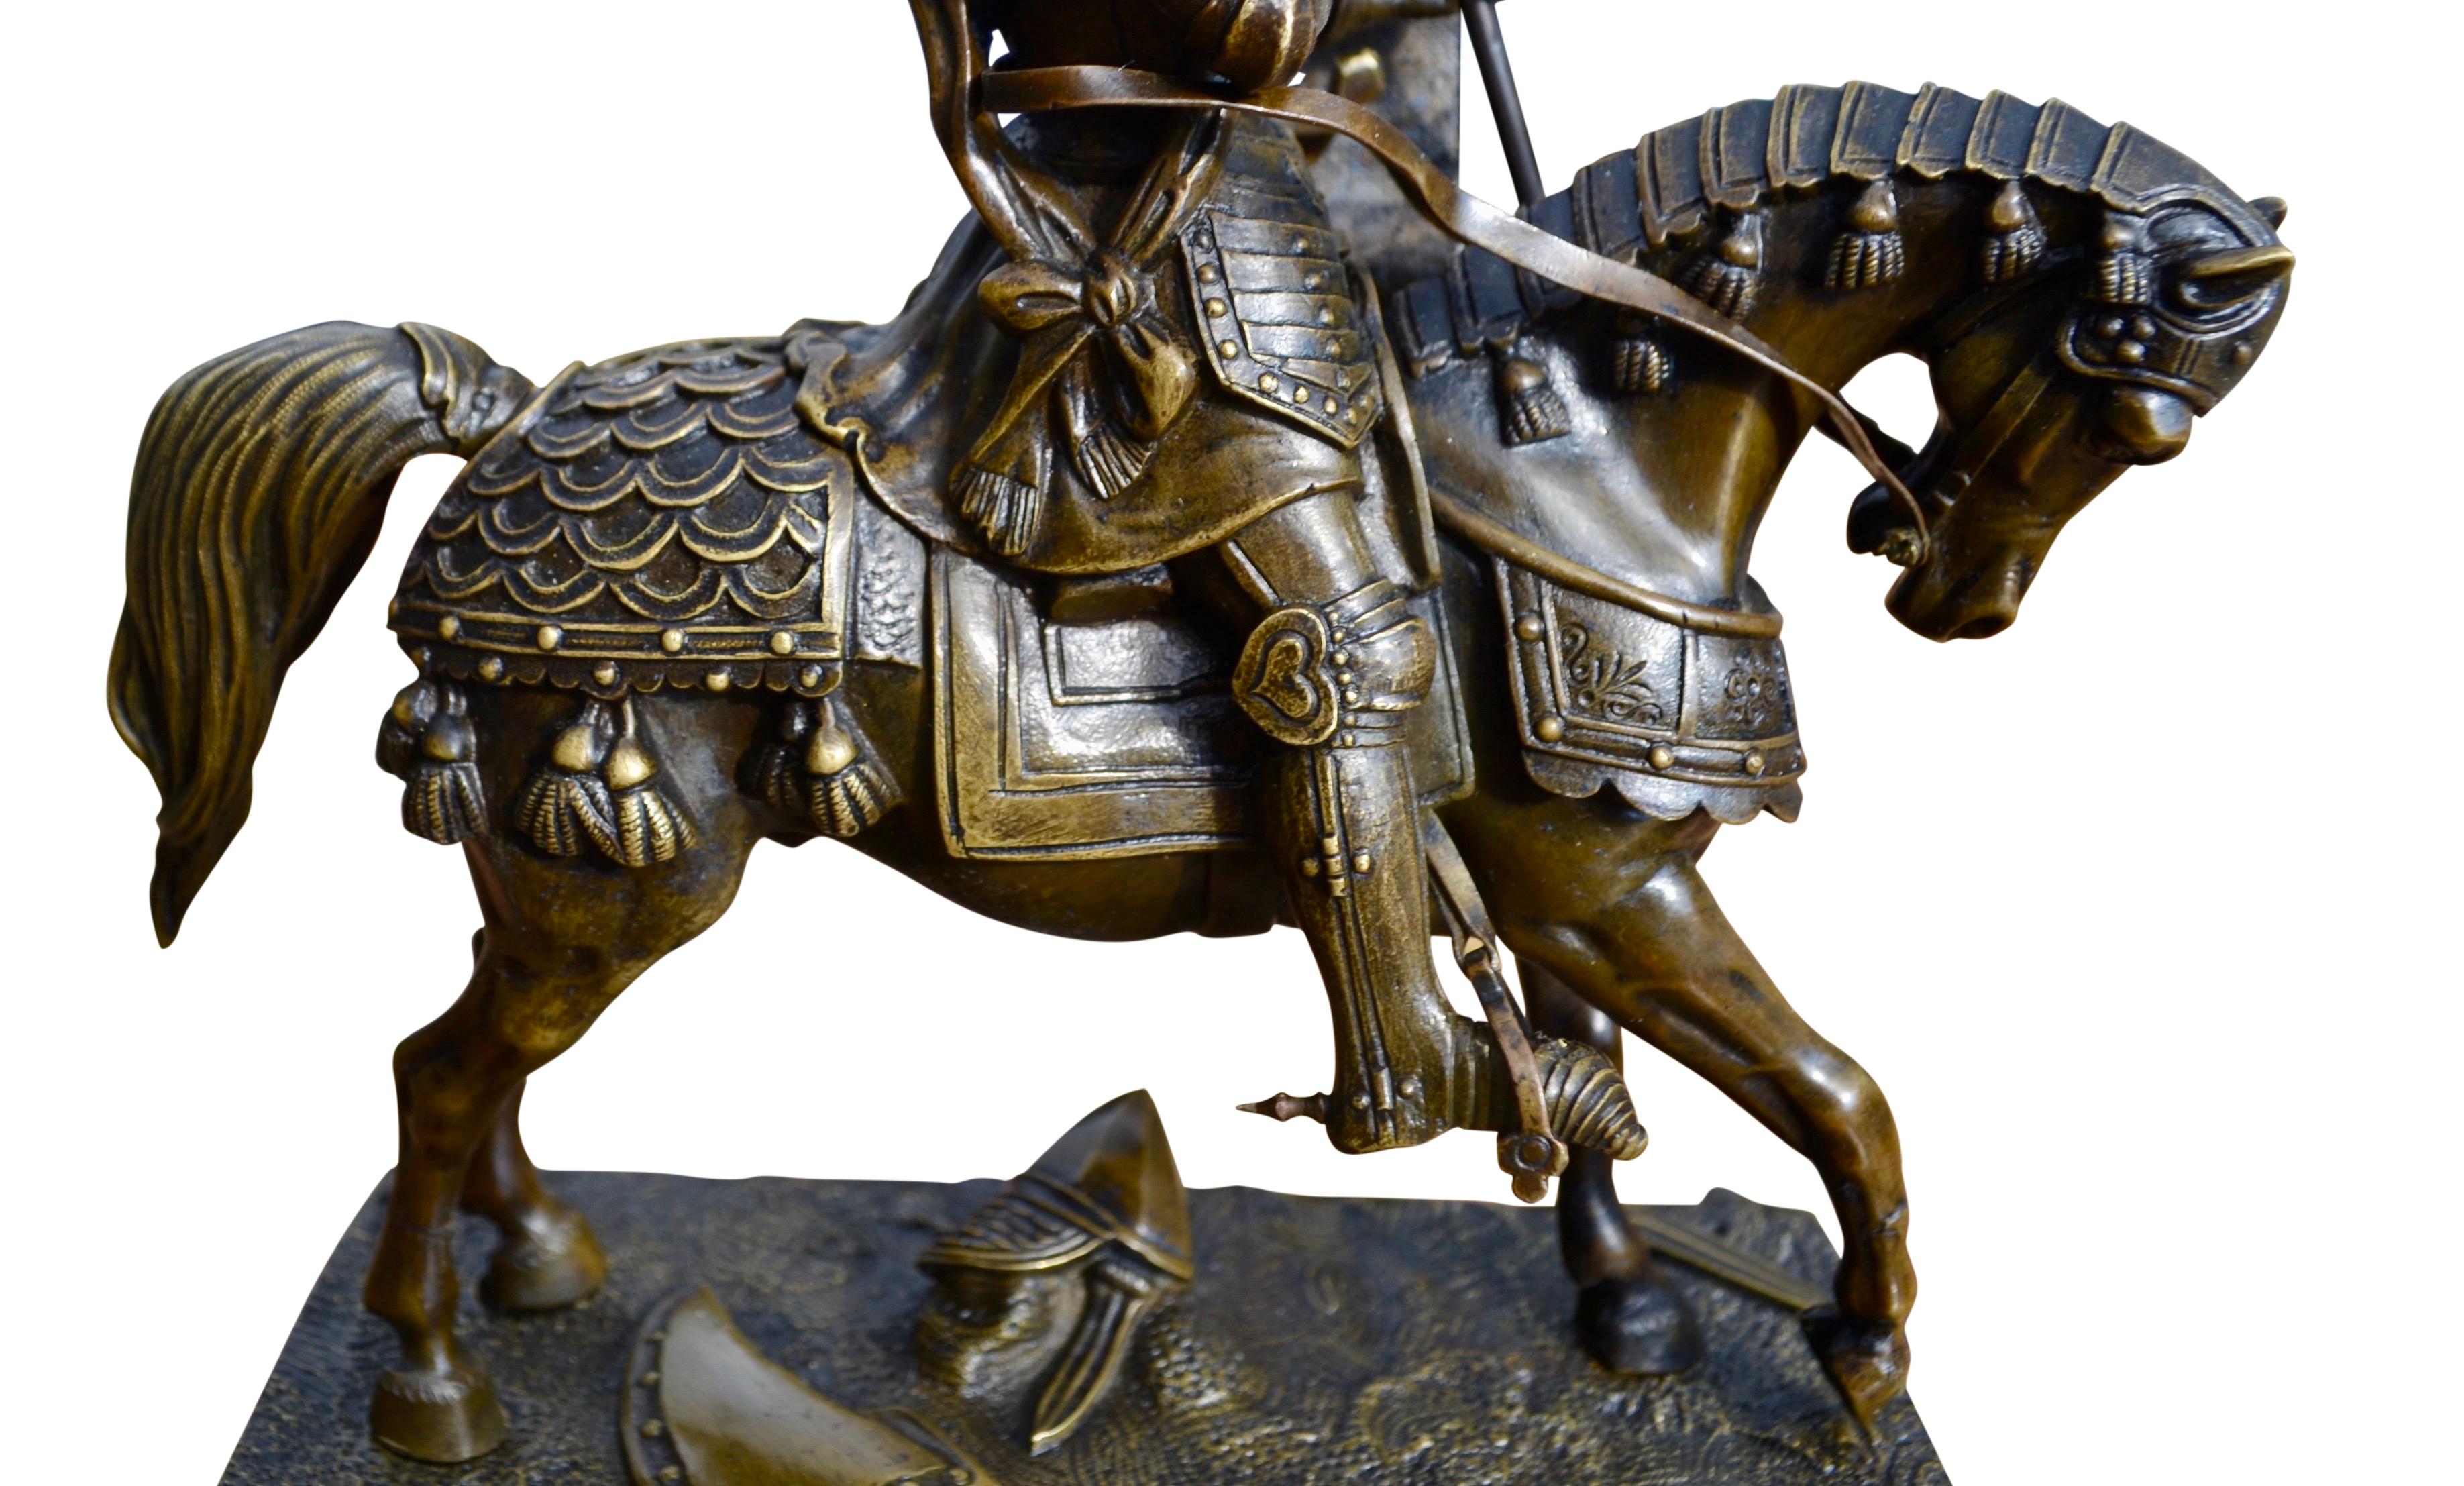 A 19 Century Bronze Statue of St Joan of Arc in full body armour on horseback In Good Condition For Sale In Vancouver, British Columbia